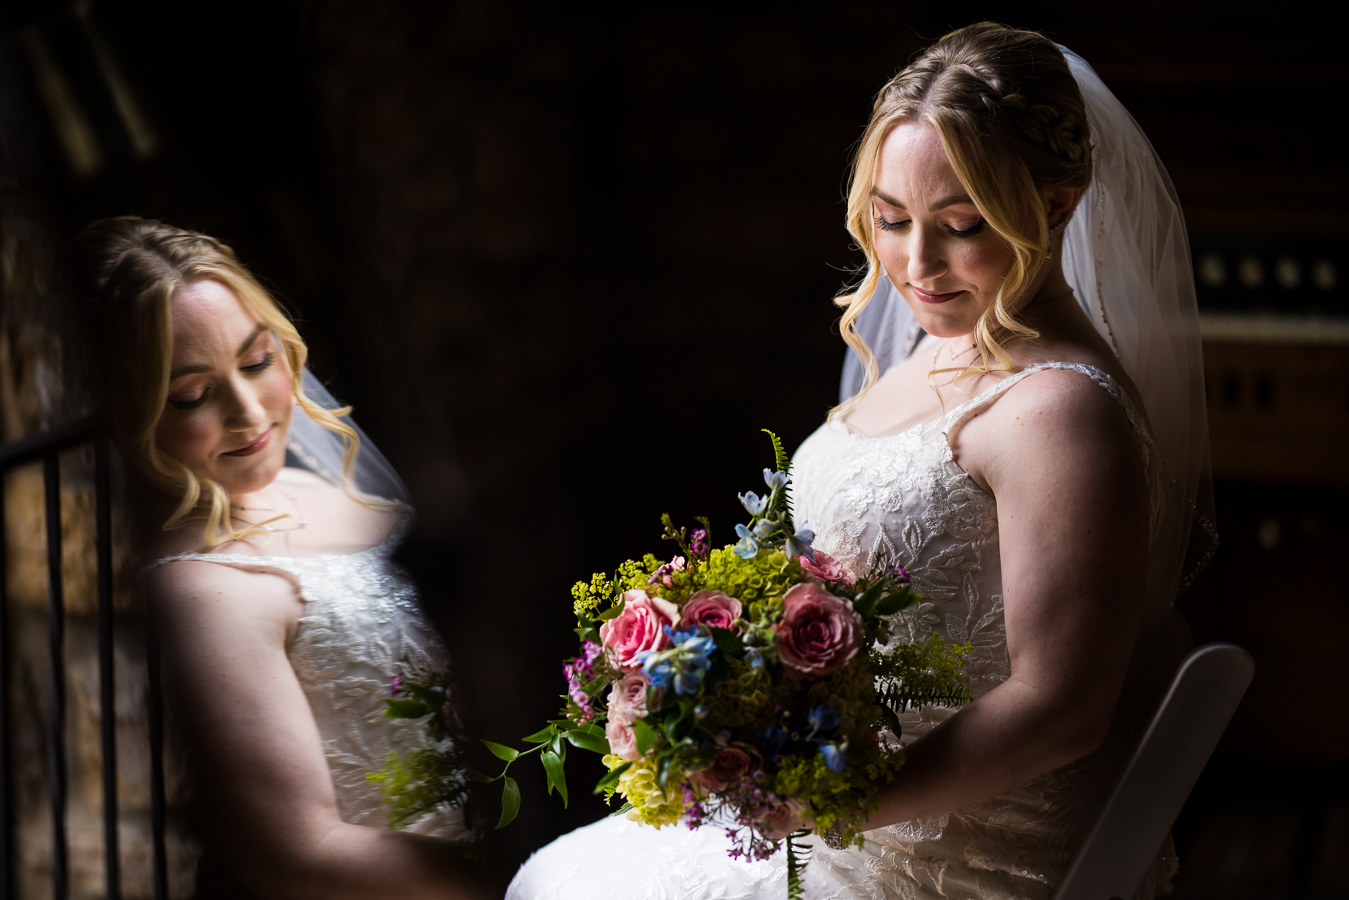 Holly Hedge Estate Wedding Photographer, lisa rhinehart, captures this unique, creative image of the bride as she looks down at her flowers and her reflection is caught in the mirror 